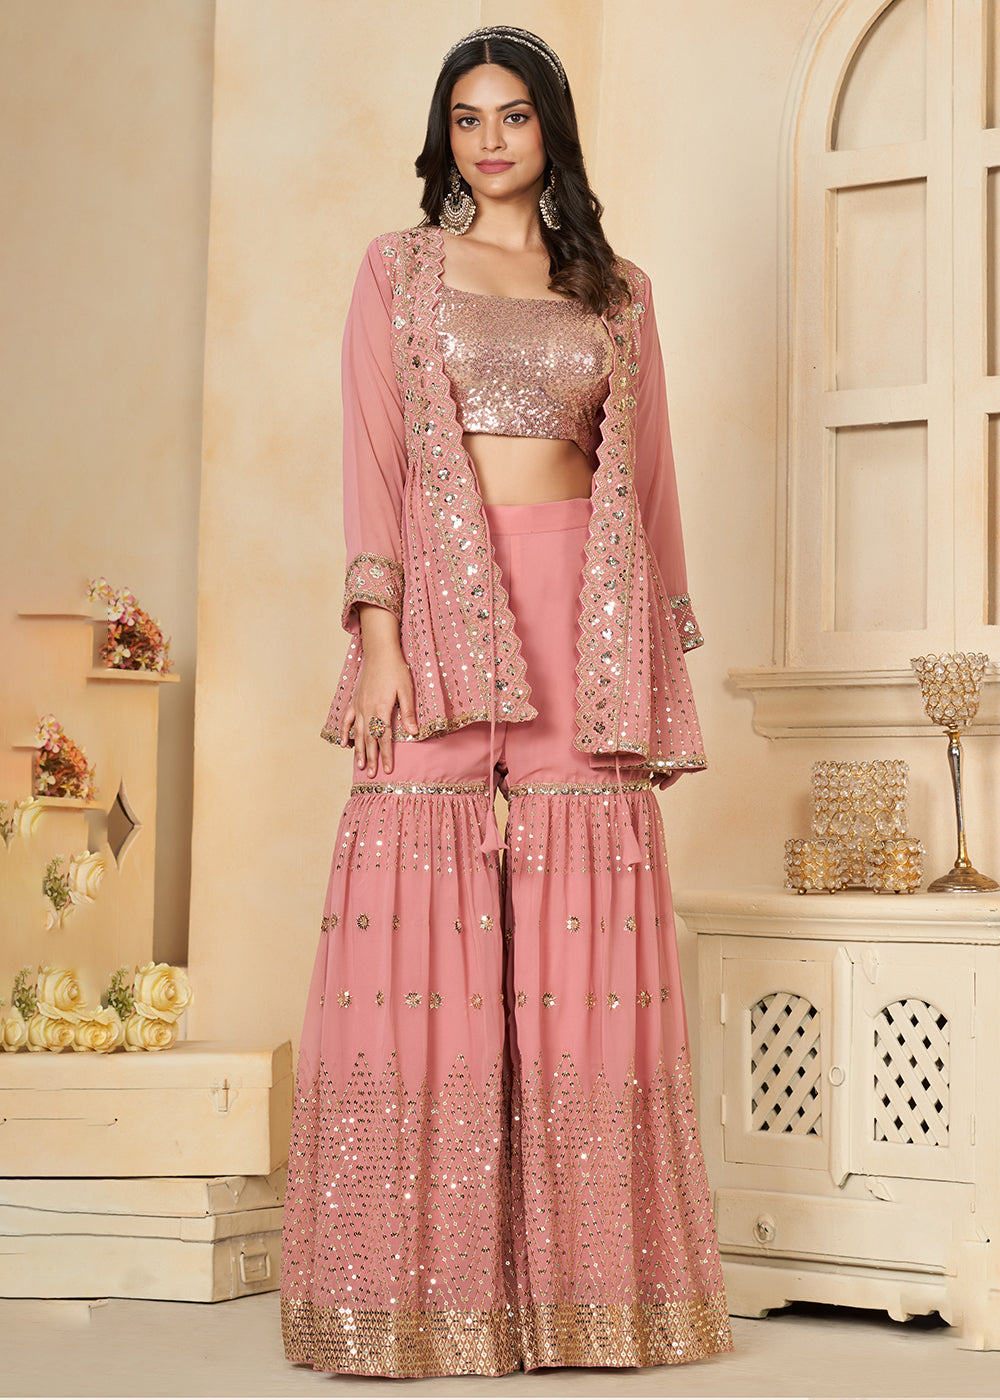 Shop Now Coral Pink Faux Georgette Indo Western Gharara Style Suit Online at Empress Clothing in USA, UK, Canada, Italy & Worldwide. 